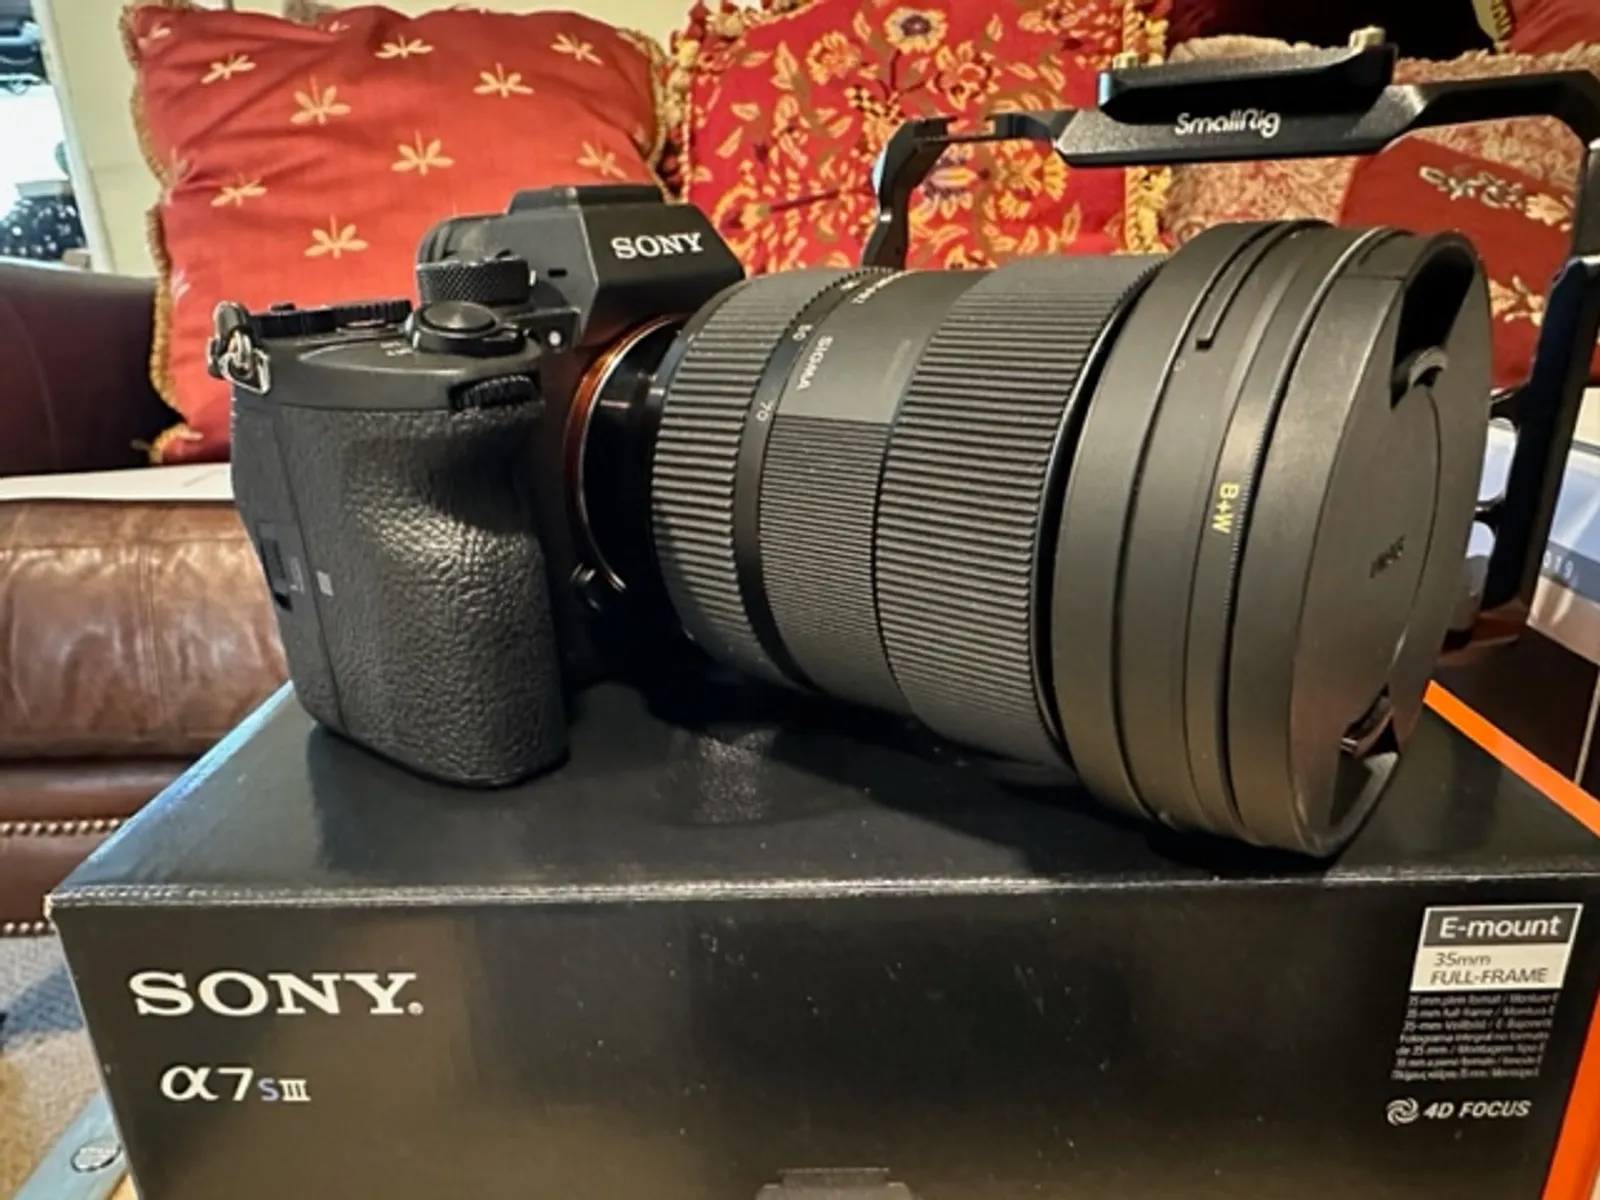 Sony Alpha A7SIII Kit: Three lenses, accessories & Pro backpack